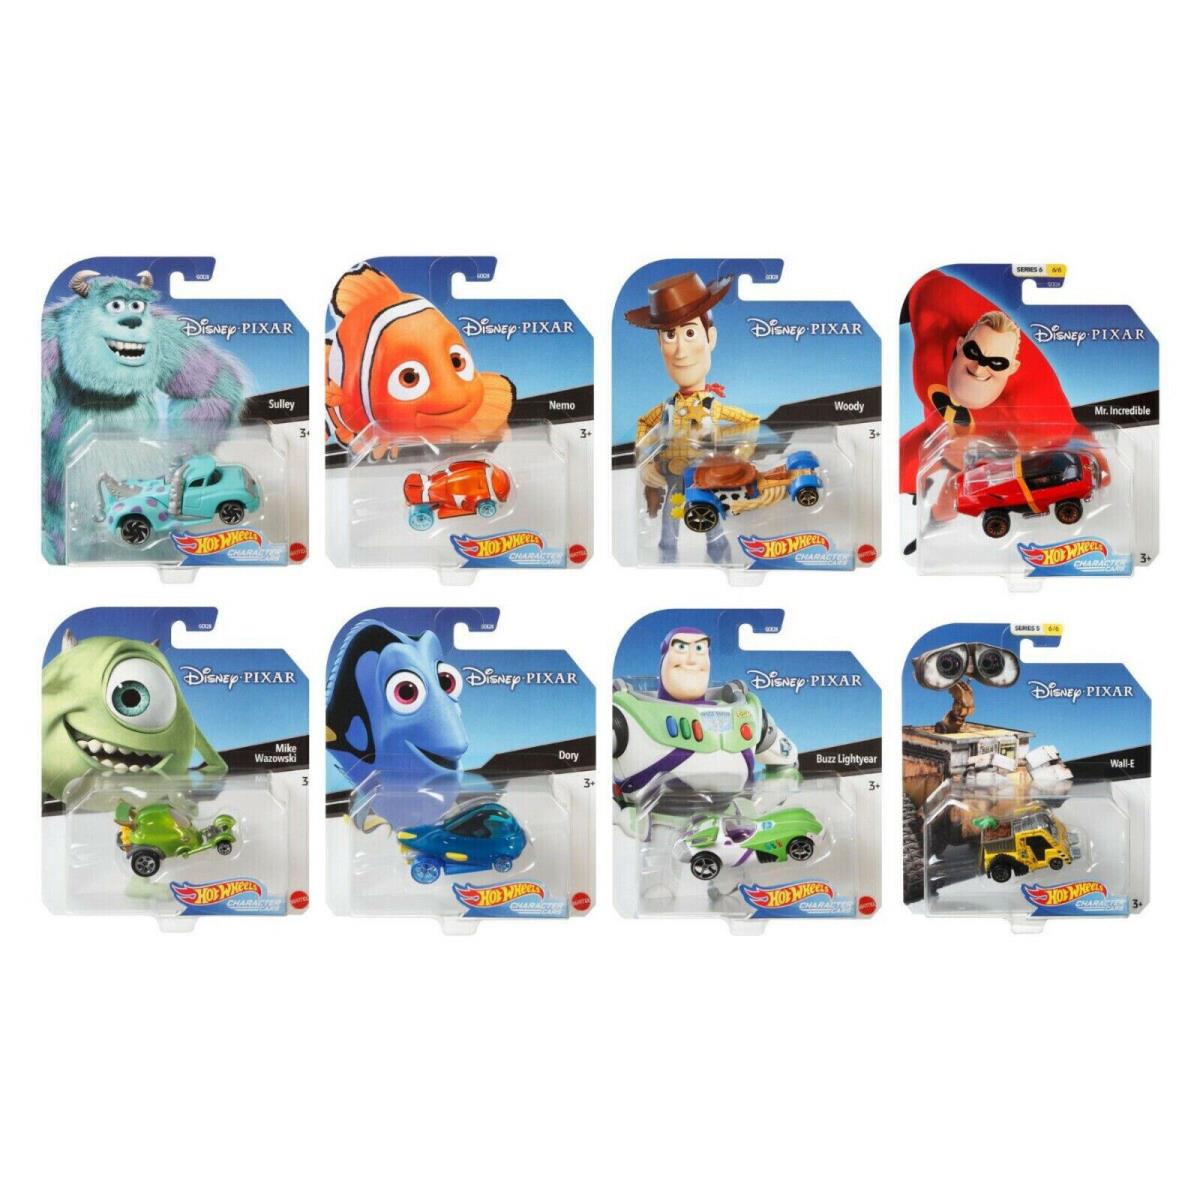 8 Disney Pixar Hot Wheels 2018 Character Cars Complete Set Woody Buzz Walle Dory